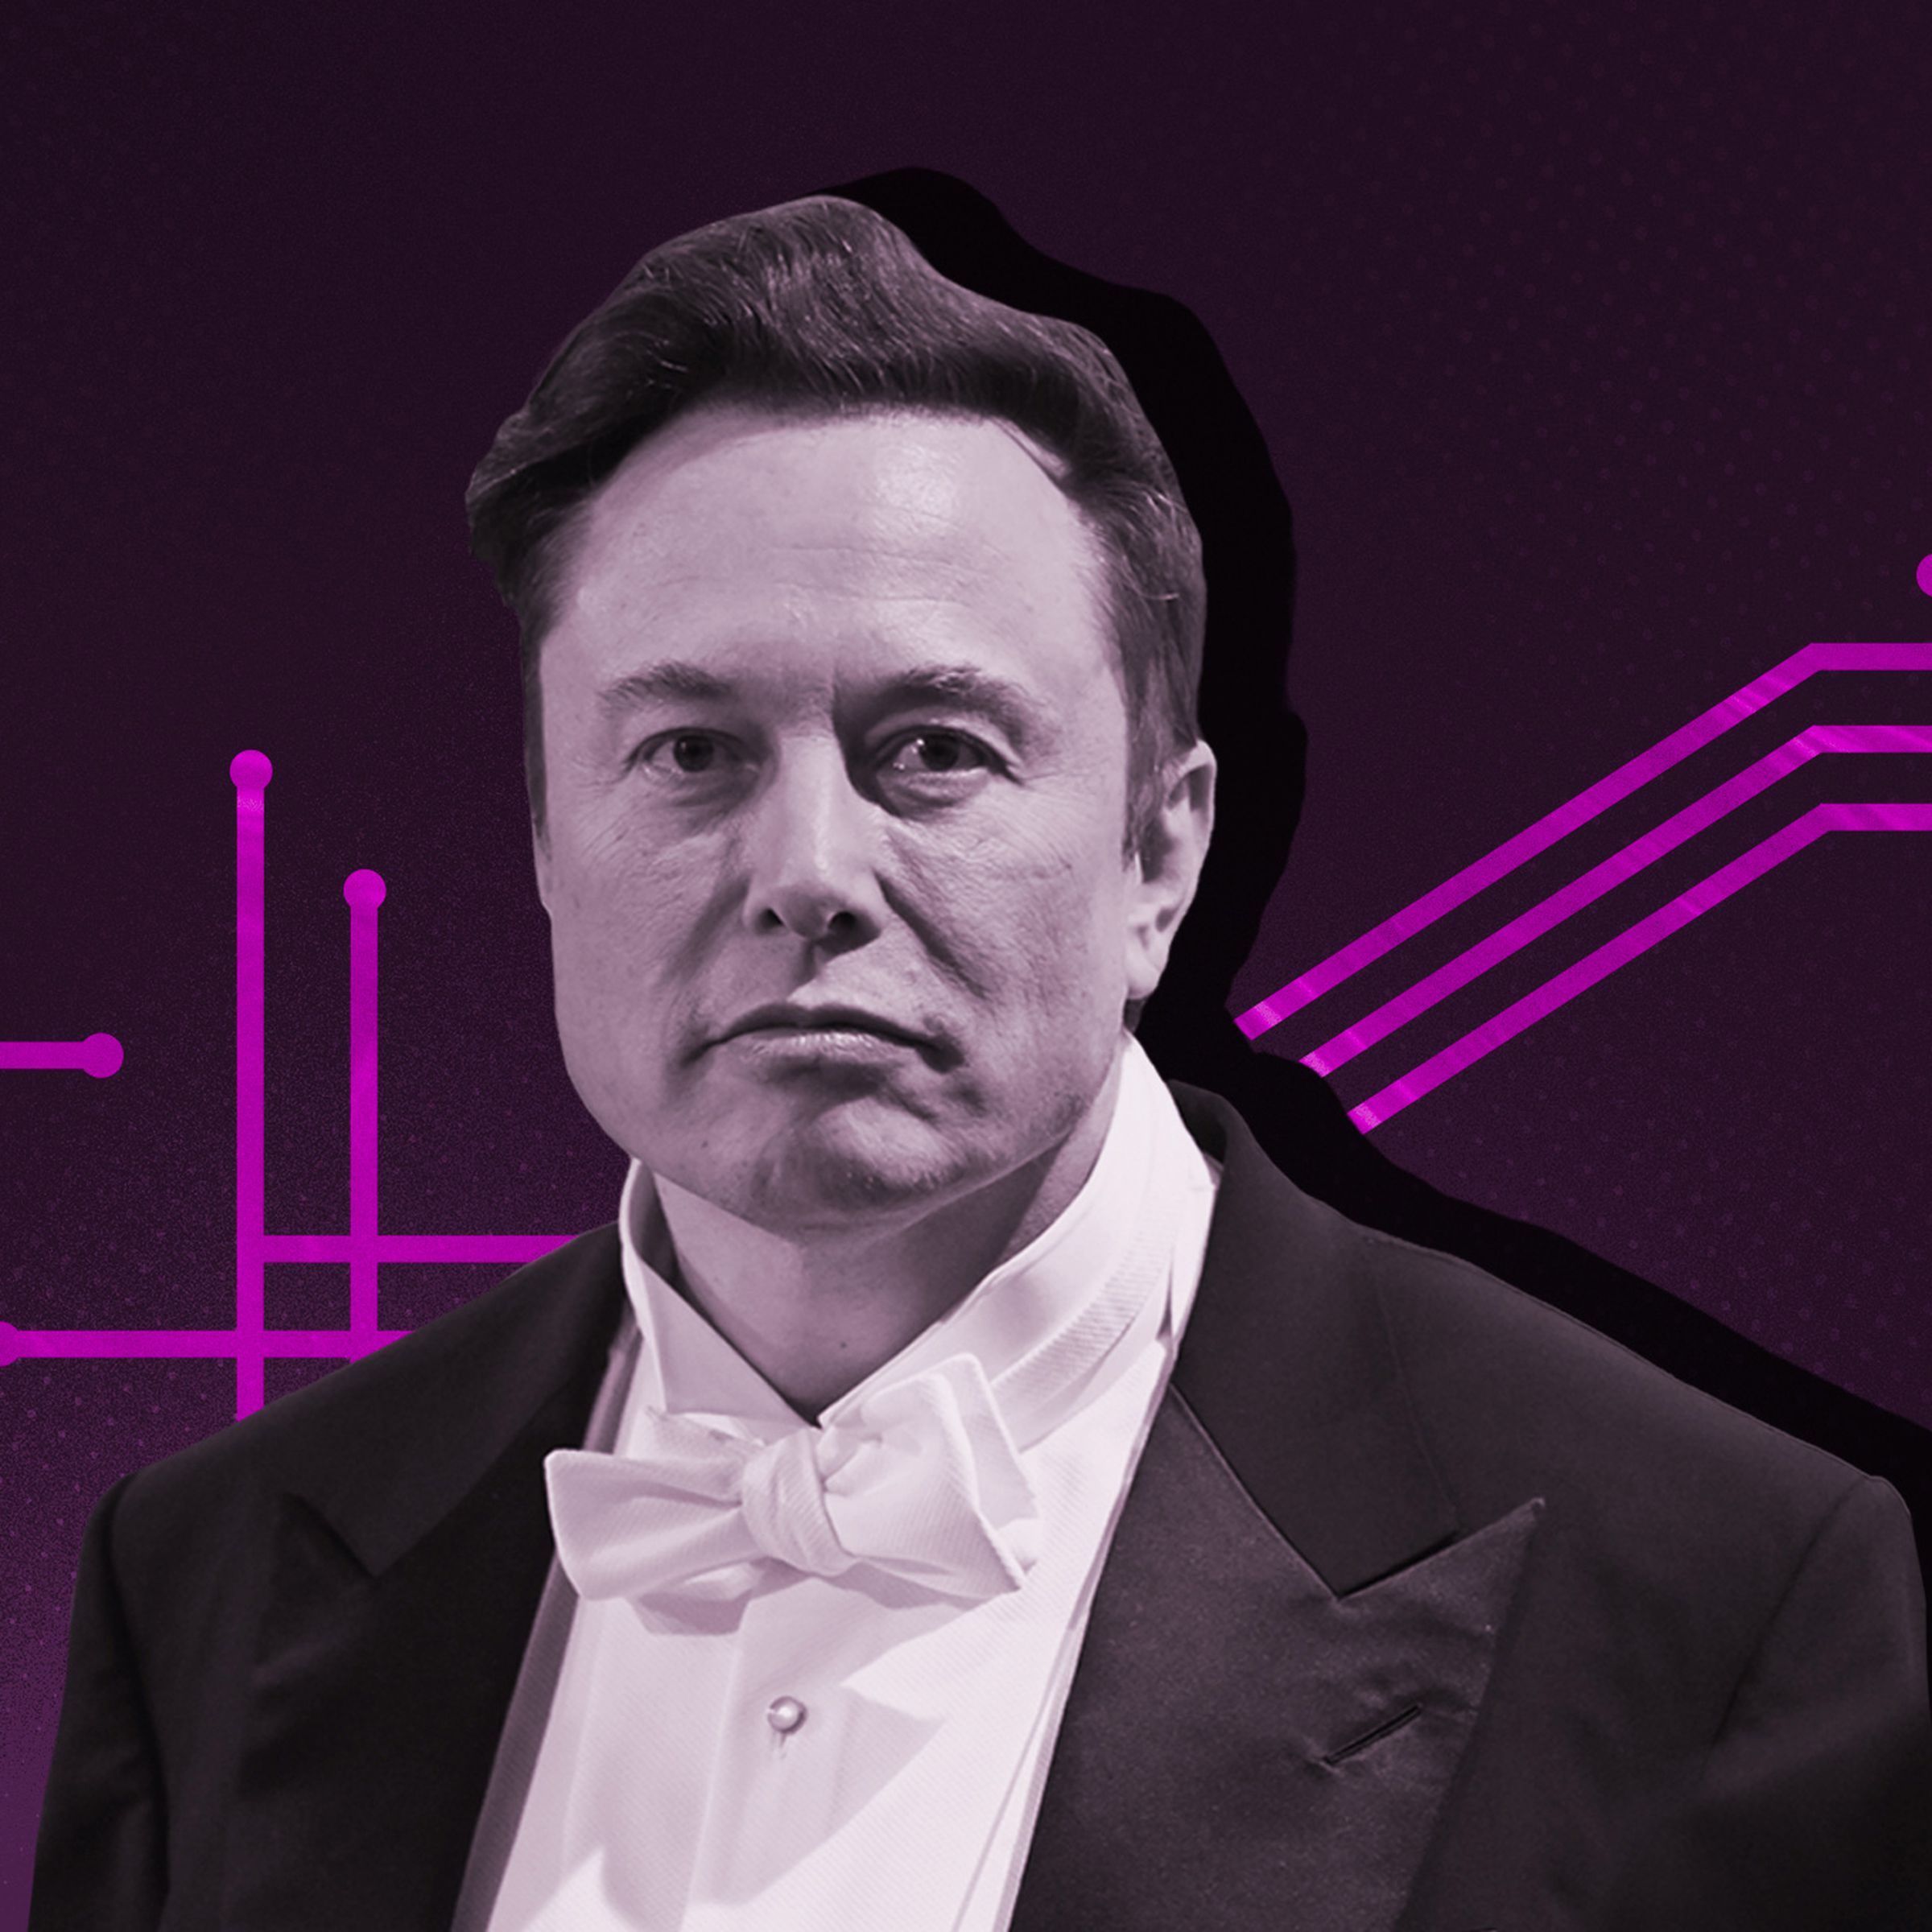 A photo of Elon Musk over a purple illustration